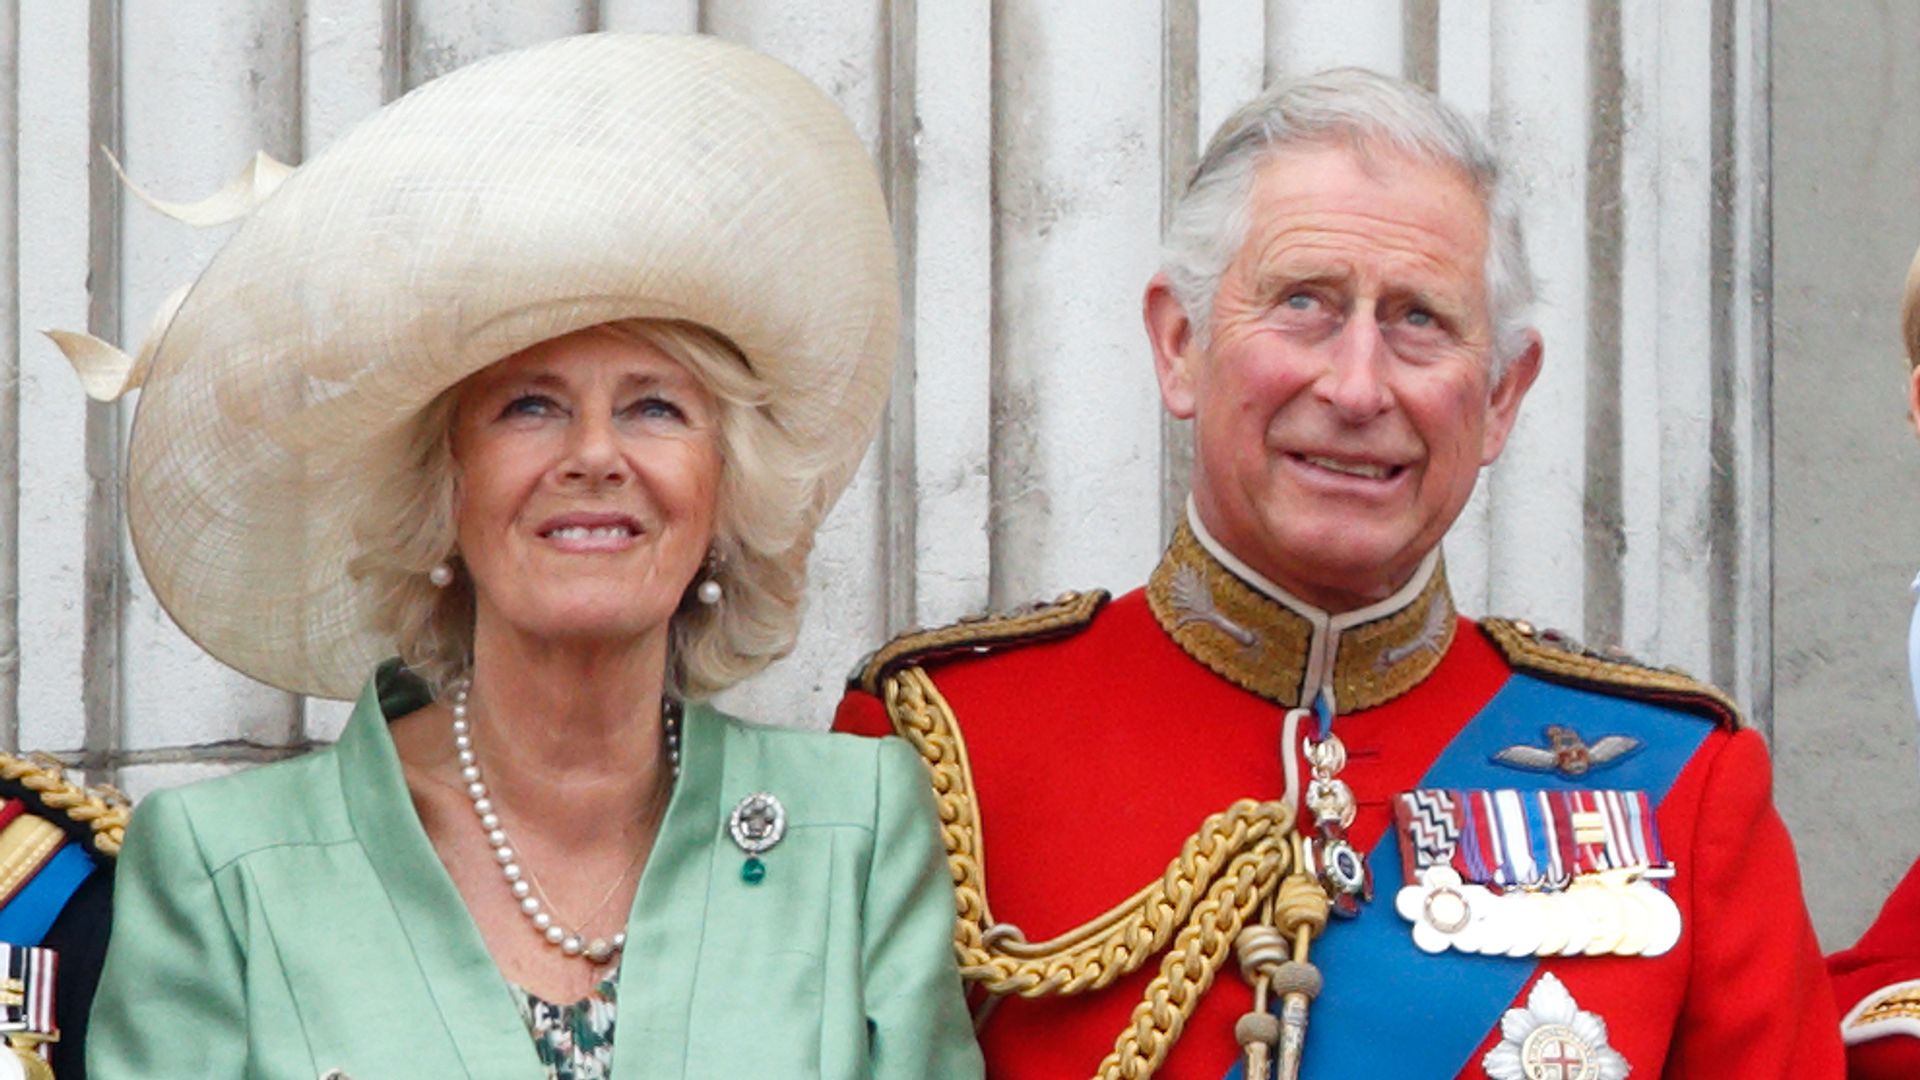 Camilla and Charles smile on palace balcony at Trooping the Colour 2015